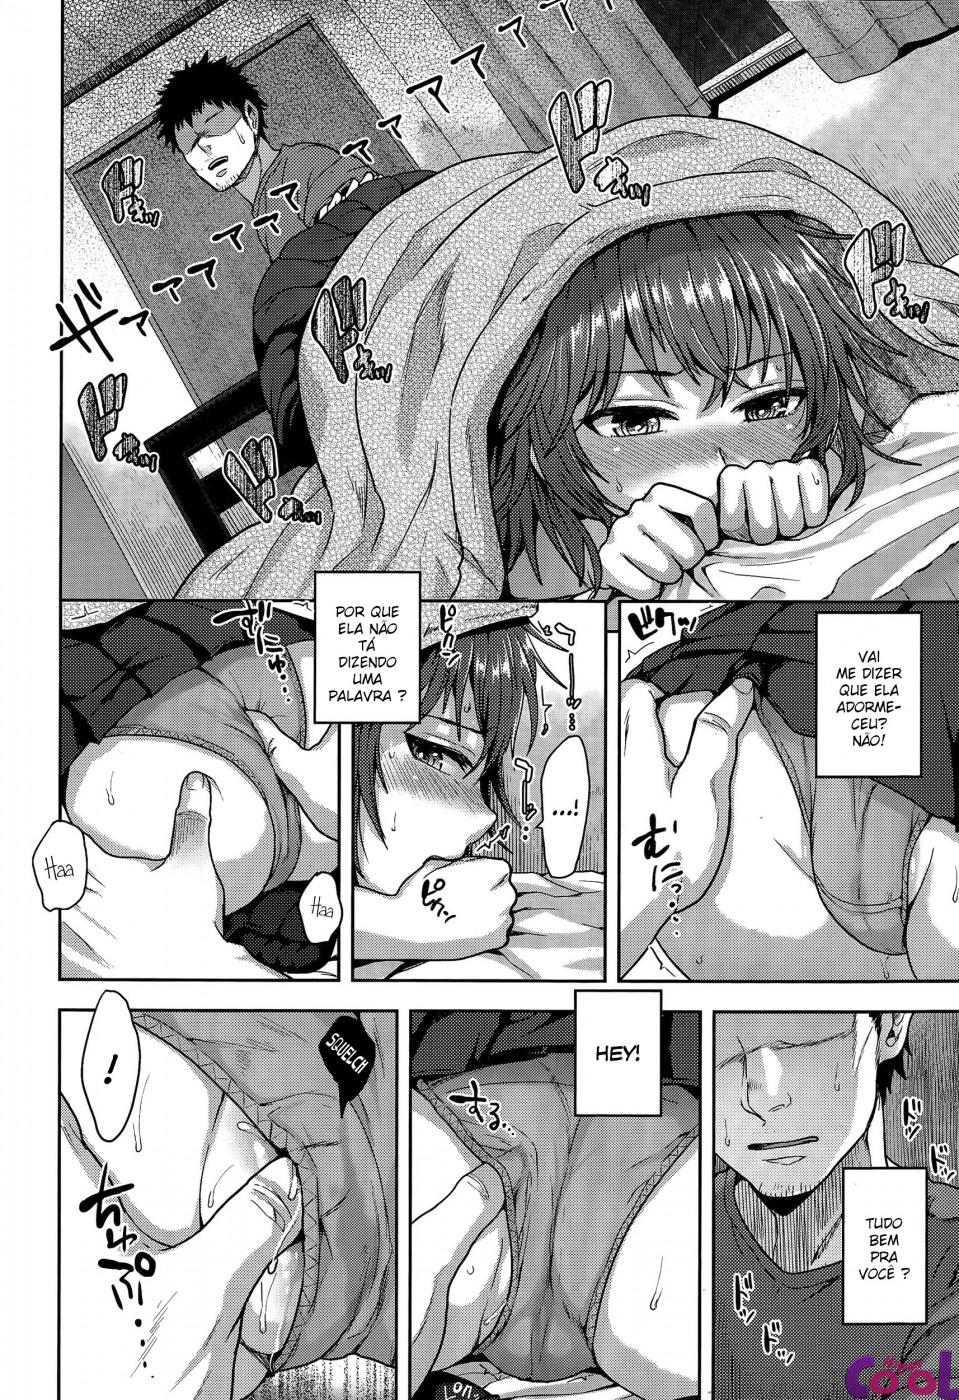 thunder-girl-chapter-01-page-9.jpg